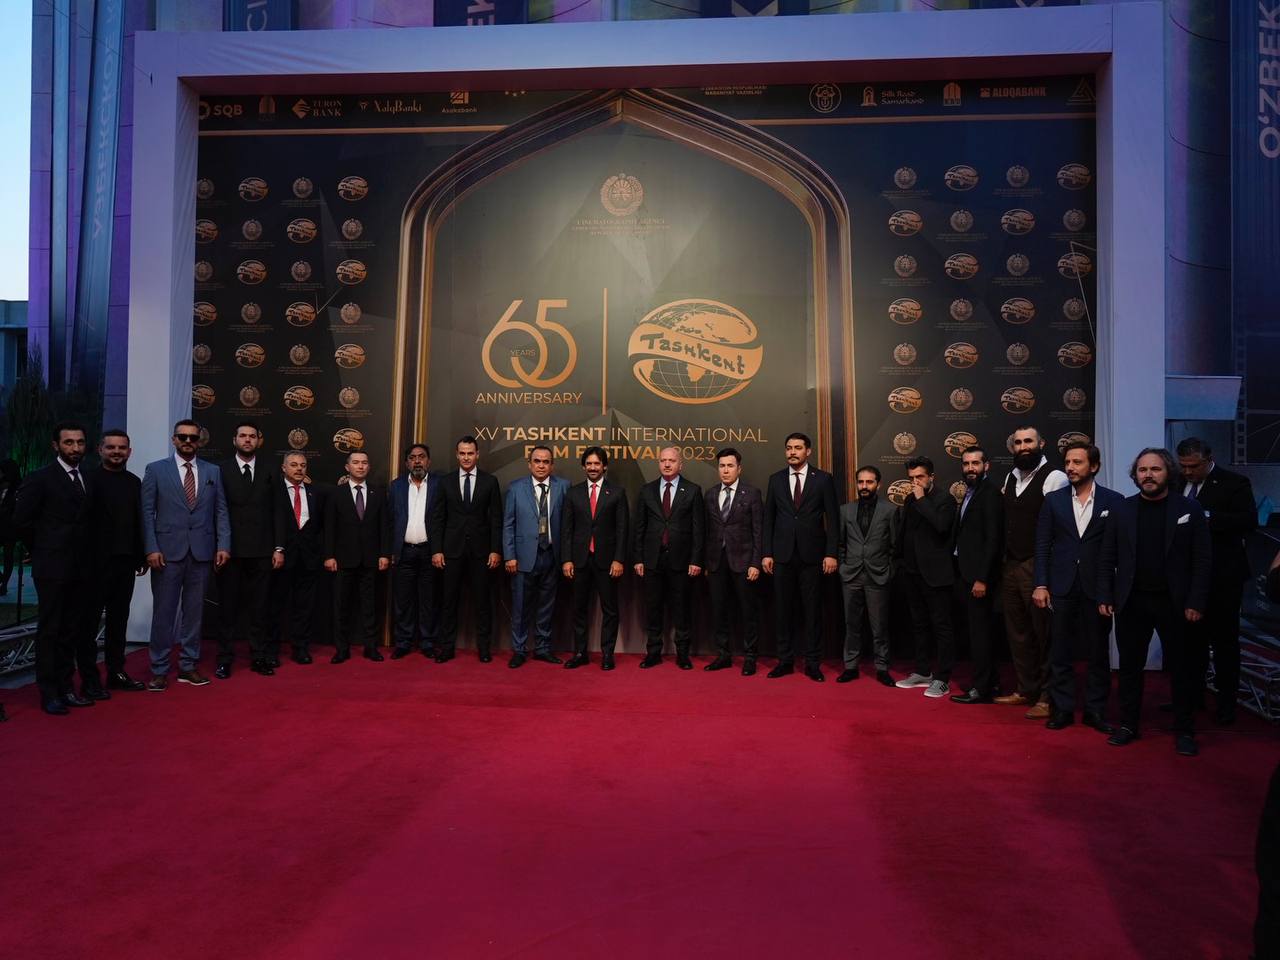 Guests of the XV Tashkent International Film Festival "Pearl of the Silk Road" continue to share their opinions on the film event